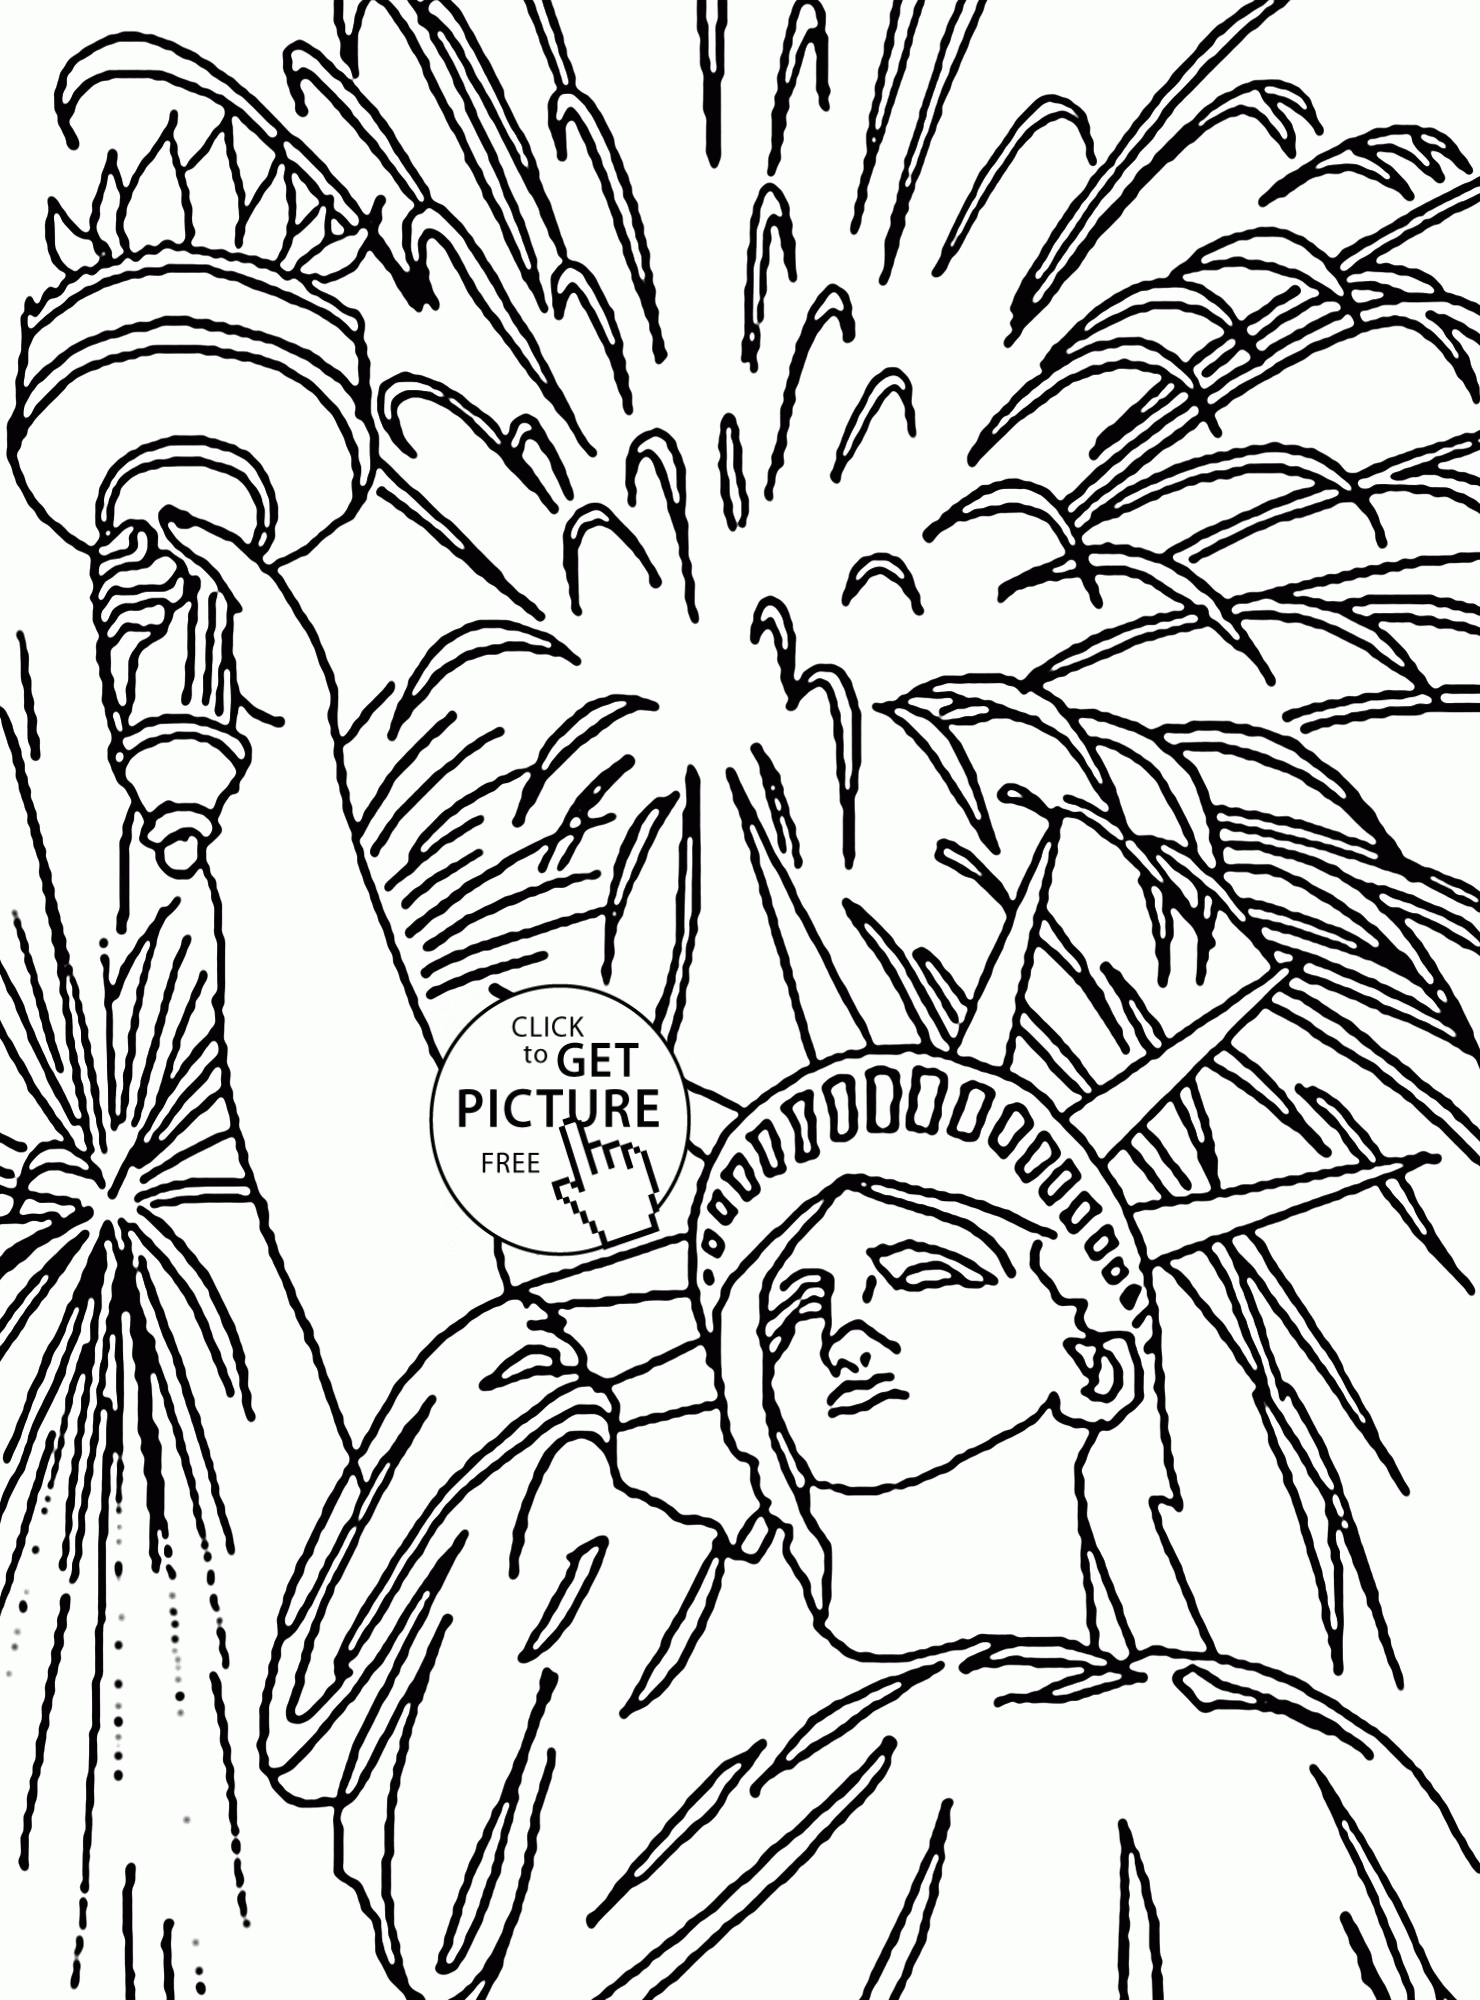 American Statue Of Liberty - Fourth Of July Coloring Page For Kids - Free Printable 4Th Of July Coloring Pages